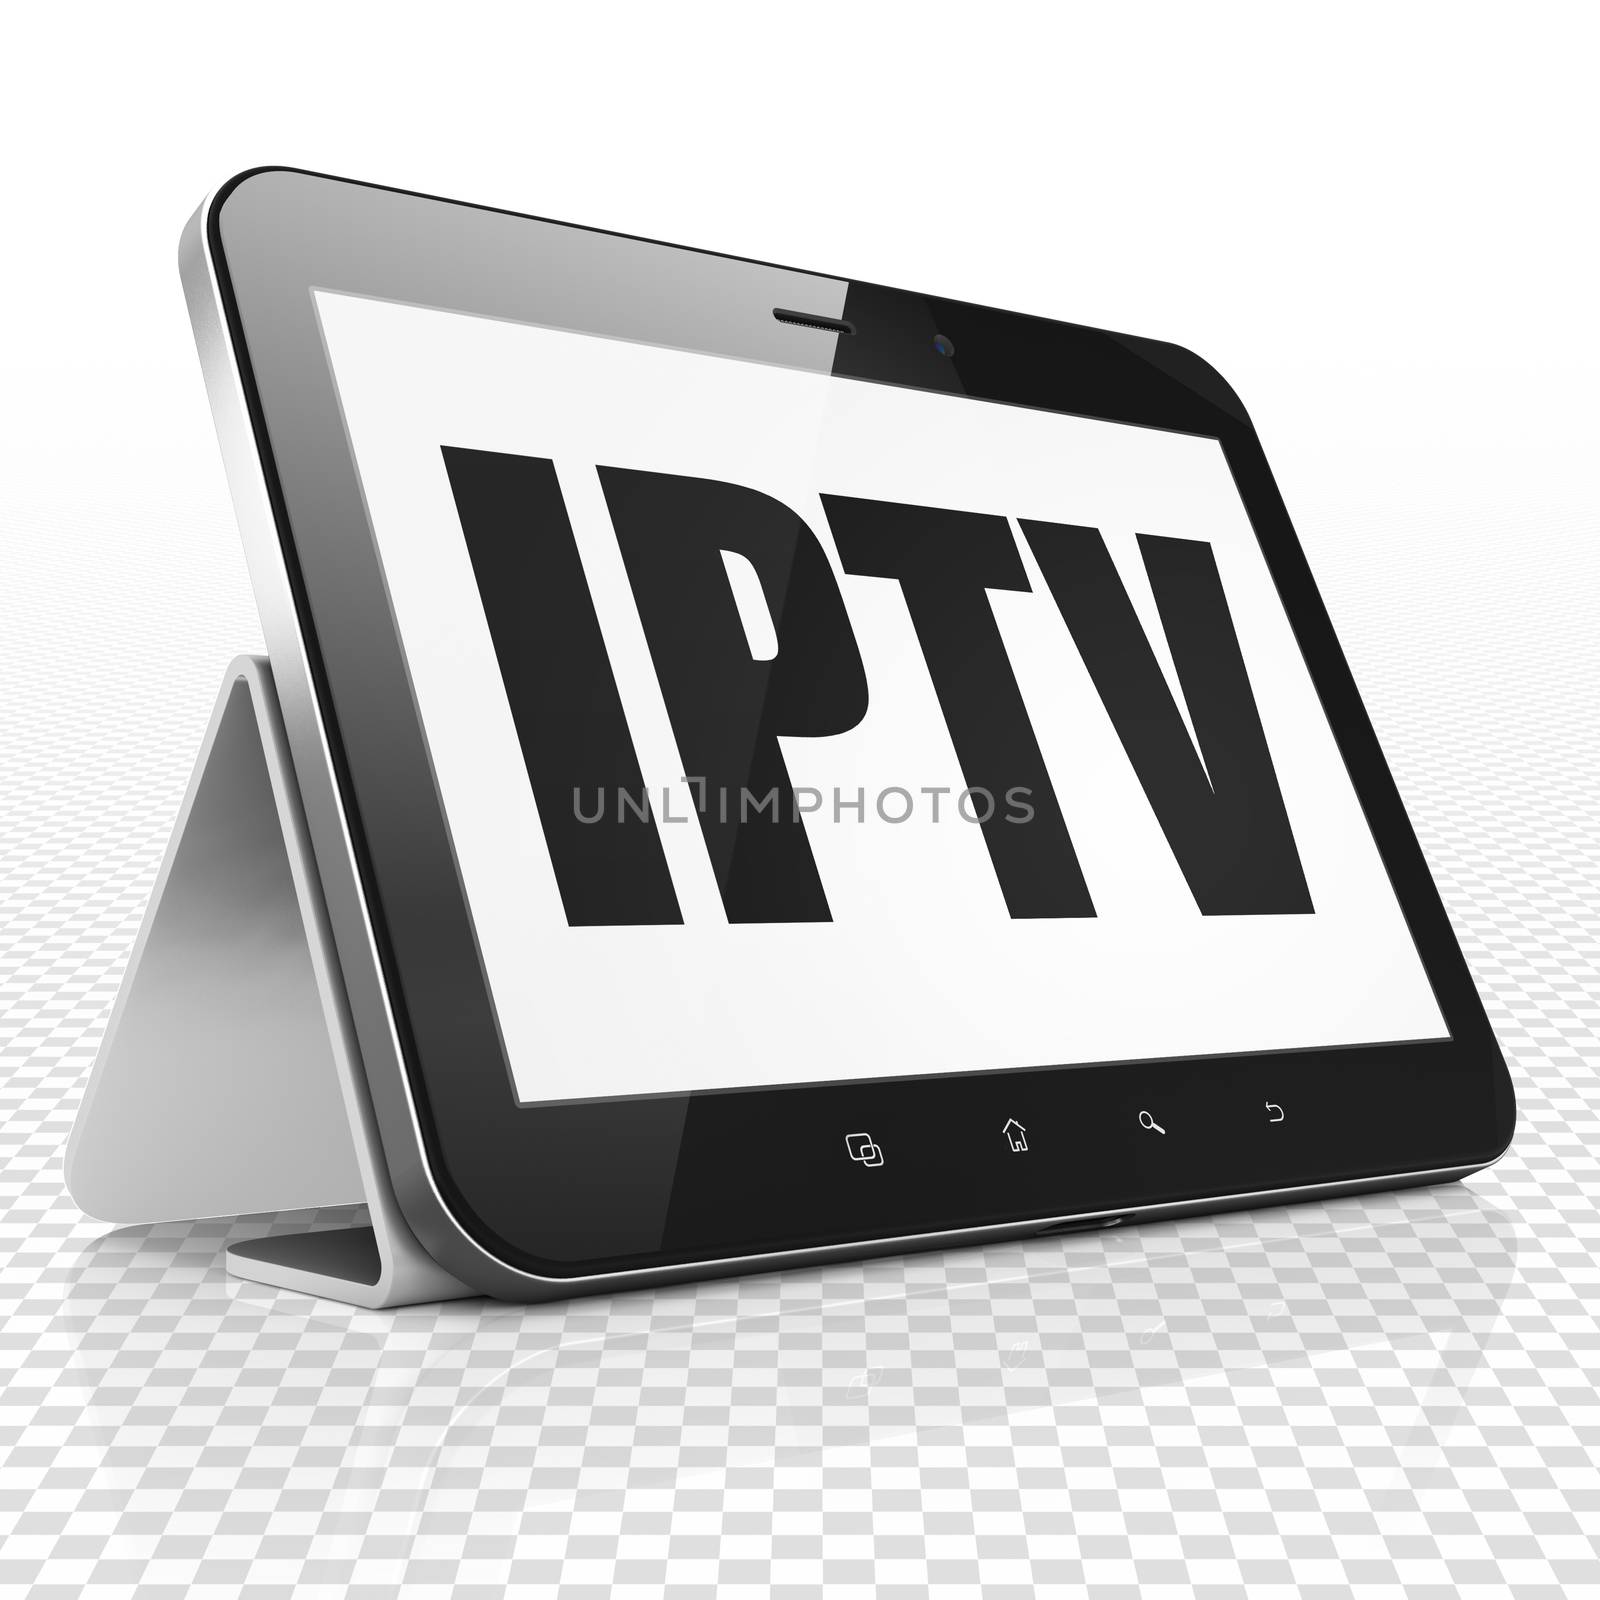 Web development concept: Tablet Computer with black text IPTV on display, 3D rendering